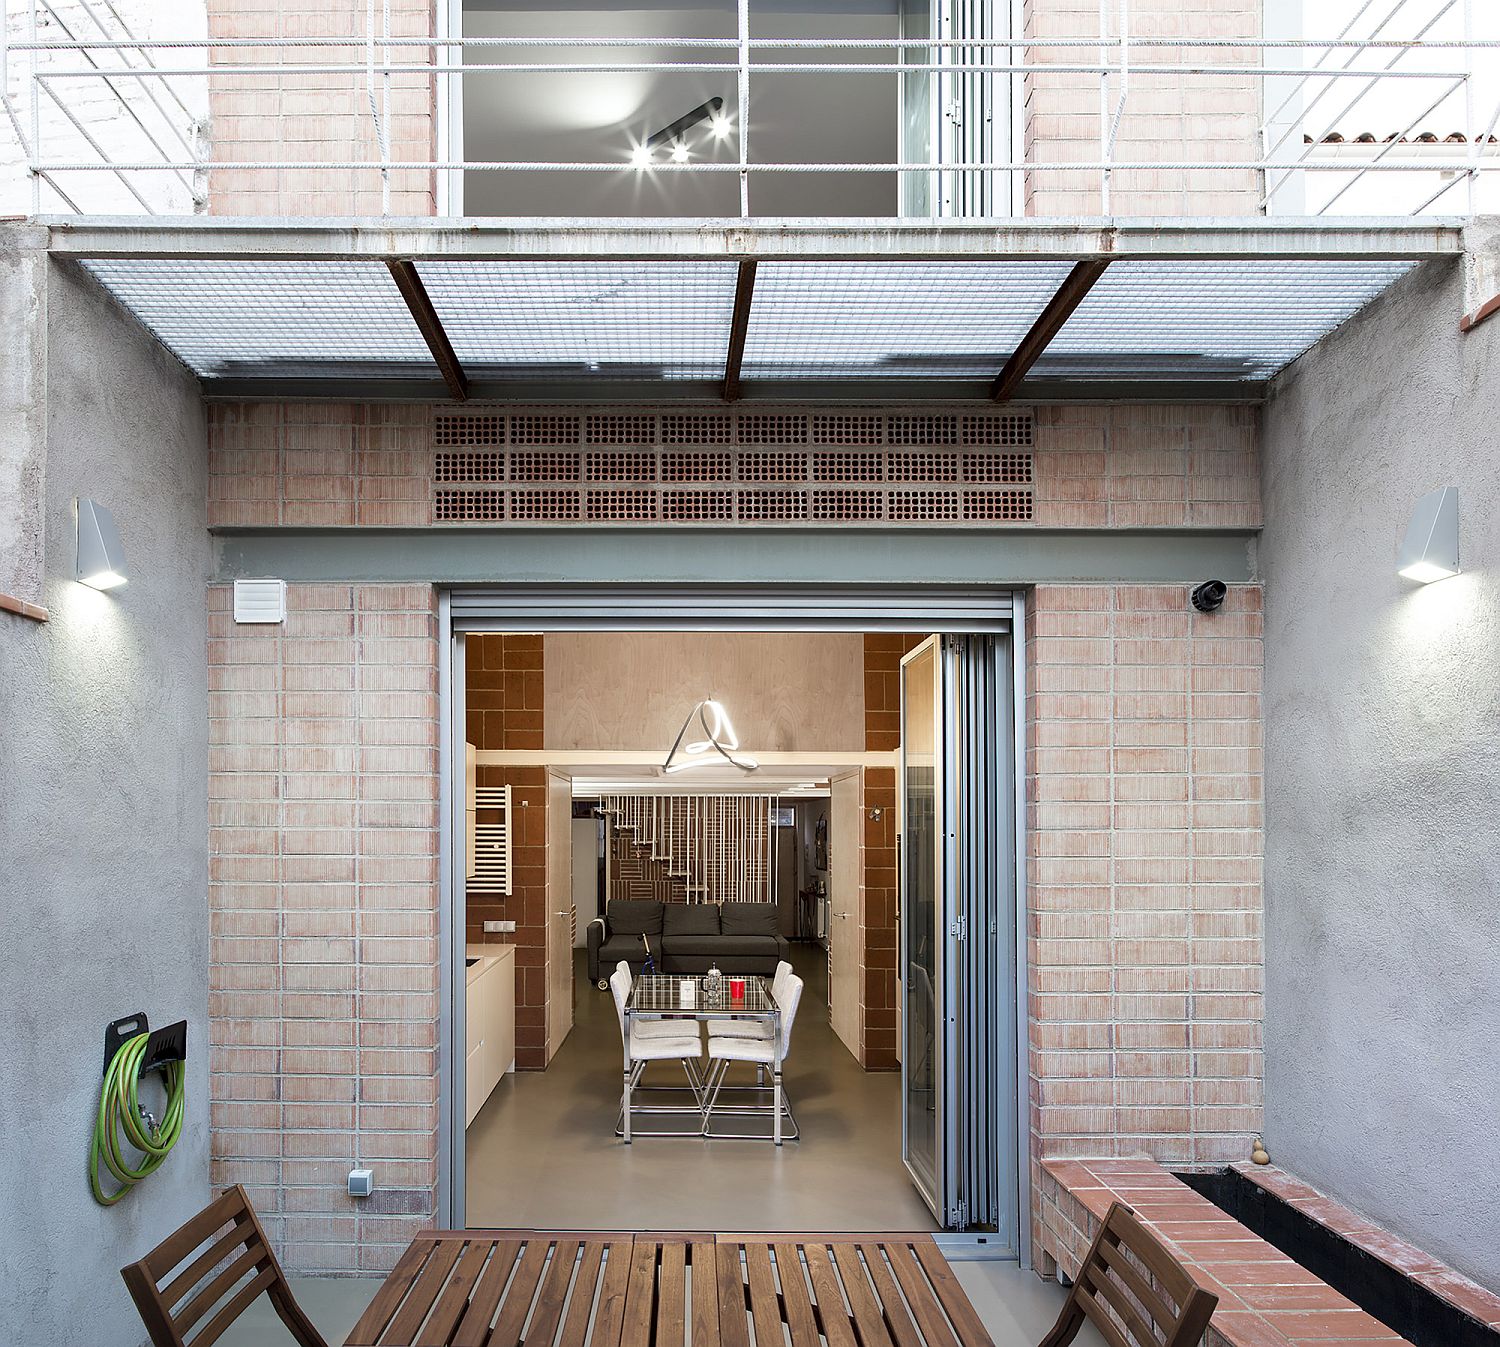 Small and private rear couryard of the Barcelona home